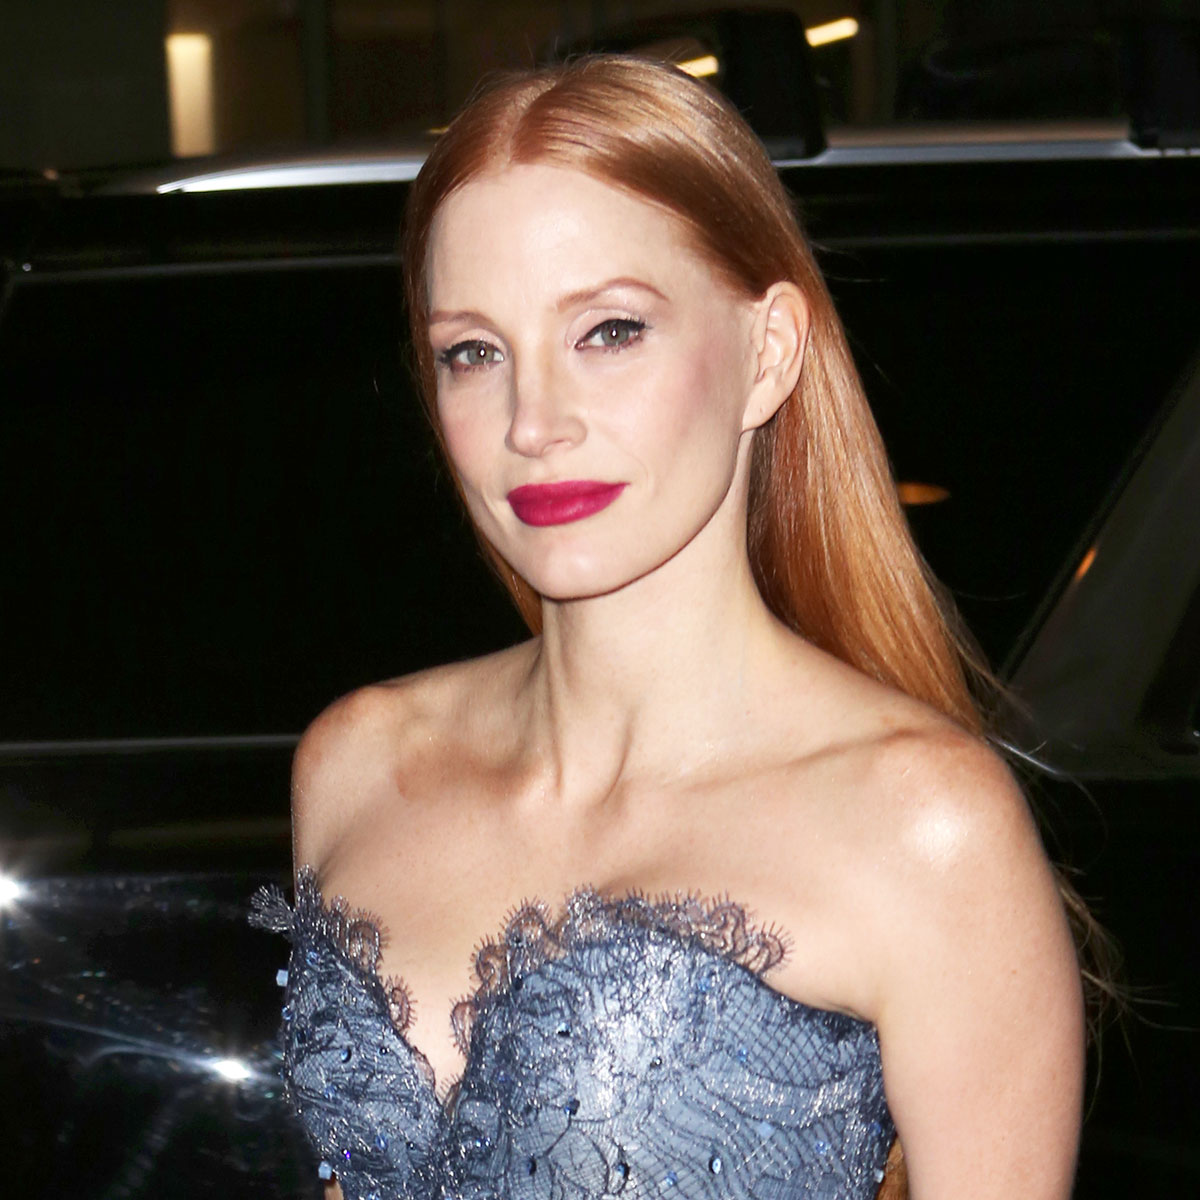 Jessica Chastain With Louis Vuitton's Capucines PM Bag in New York